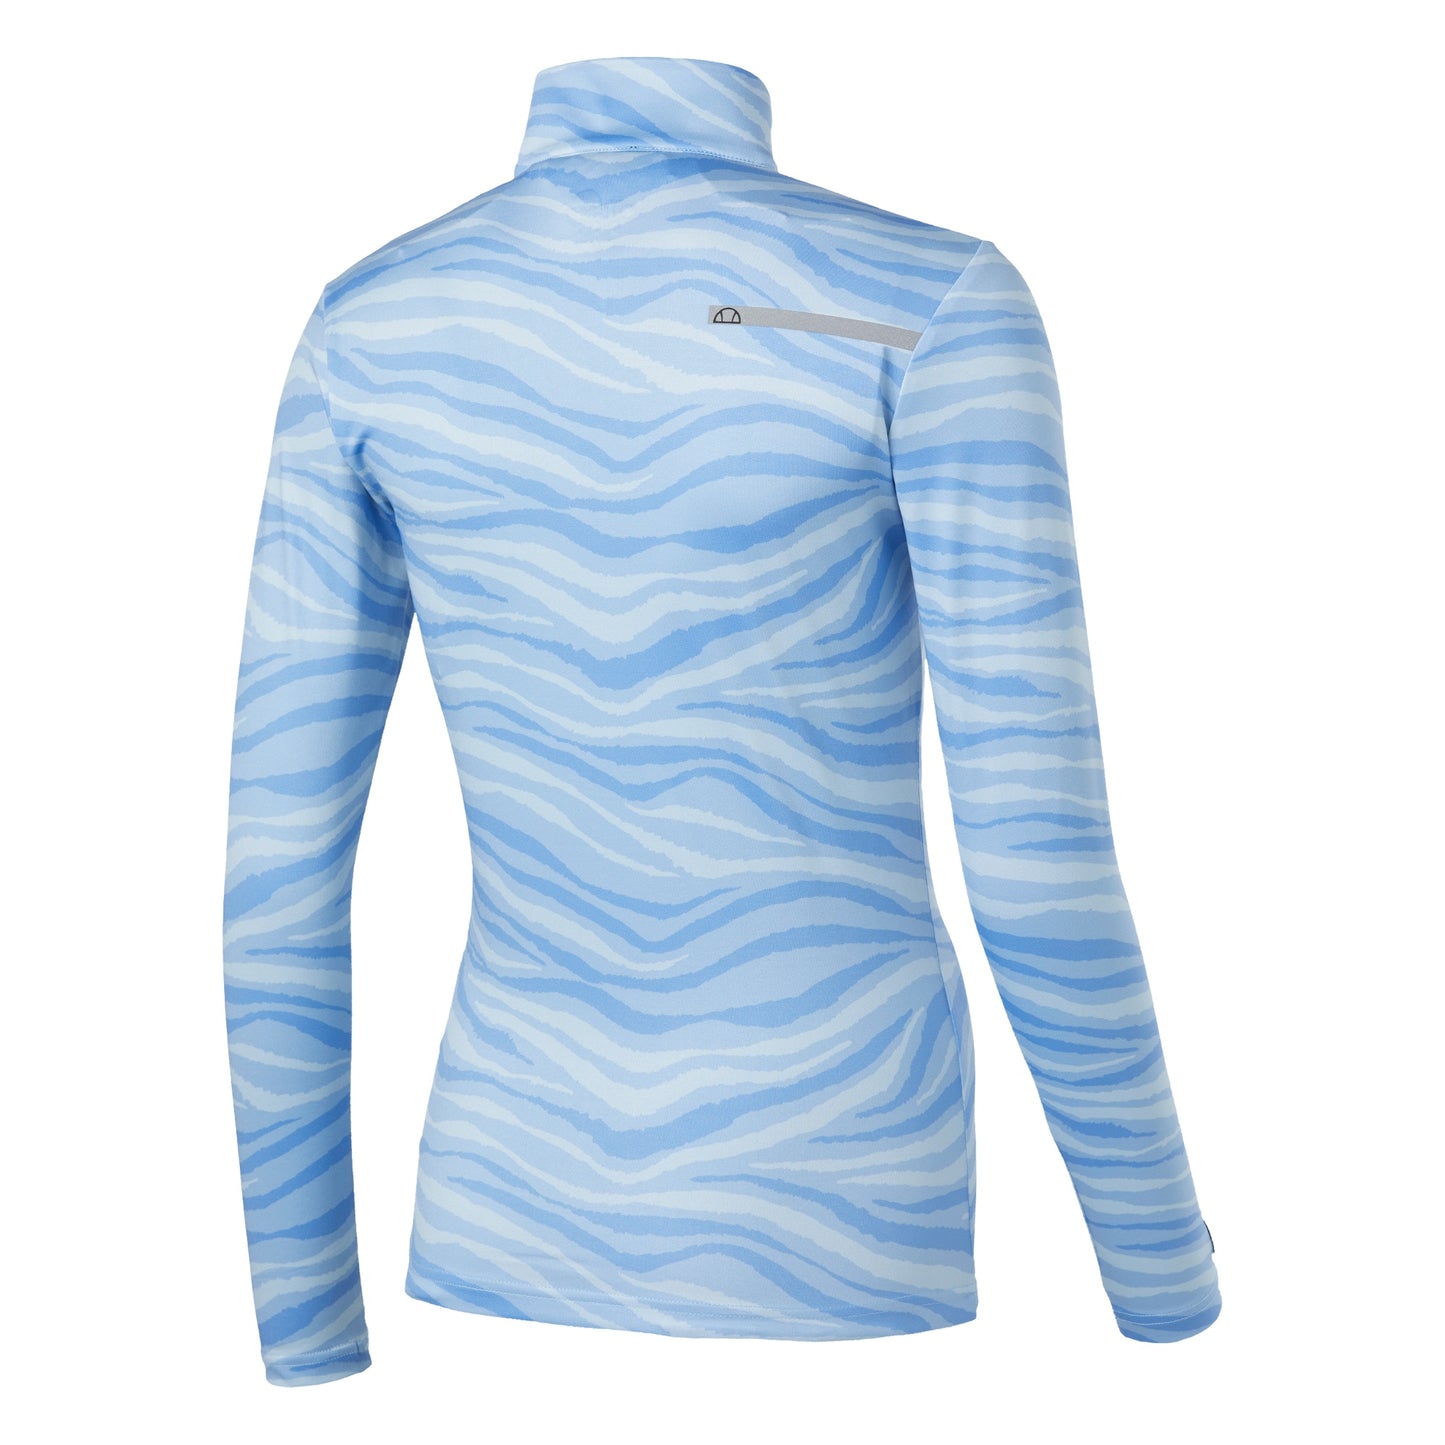 Ellesse Light Blue Zip-Neck Top with Abstract Wave Print